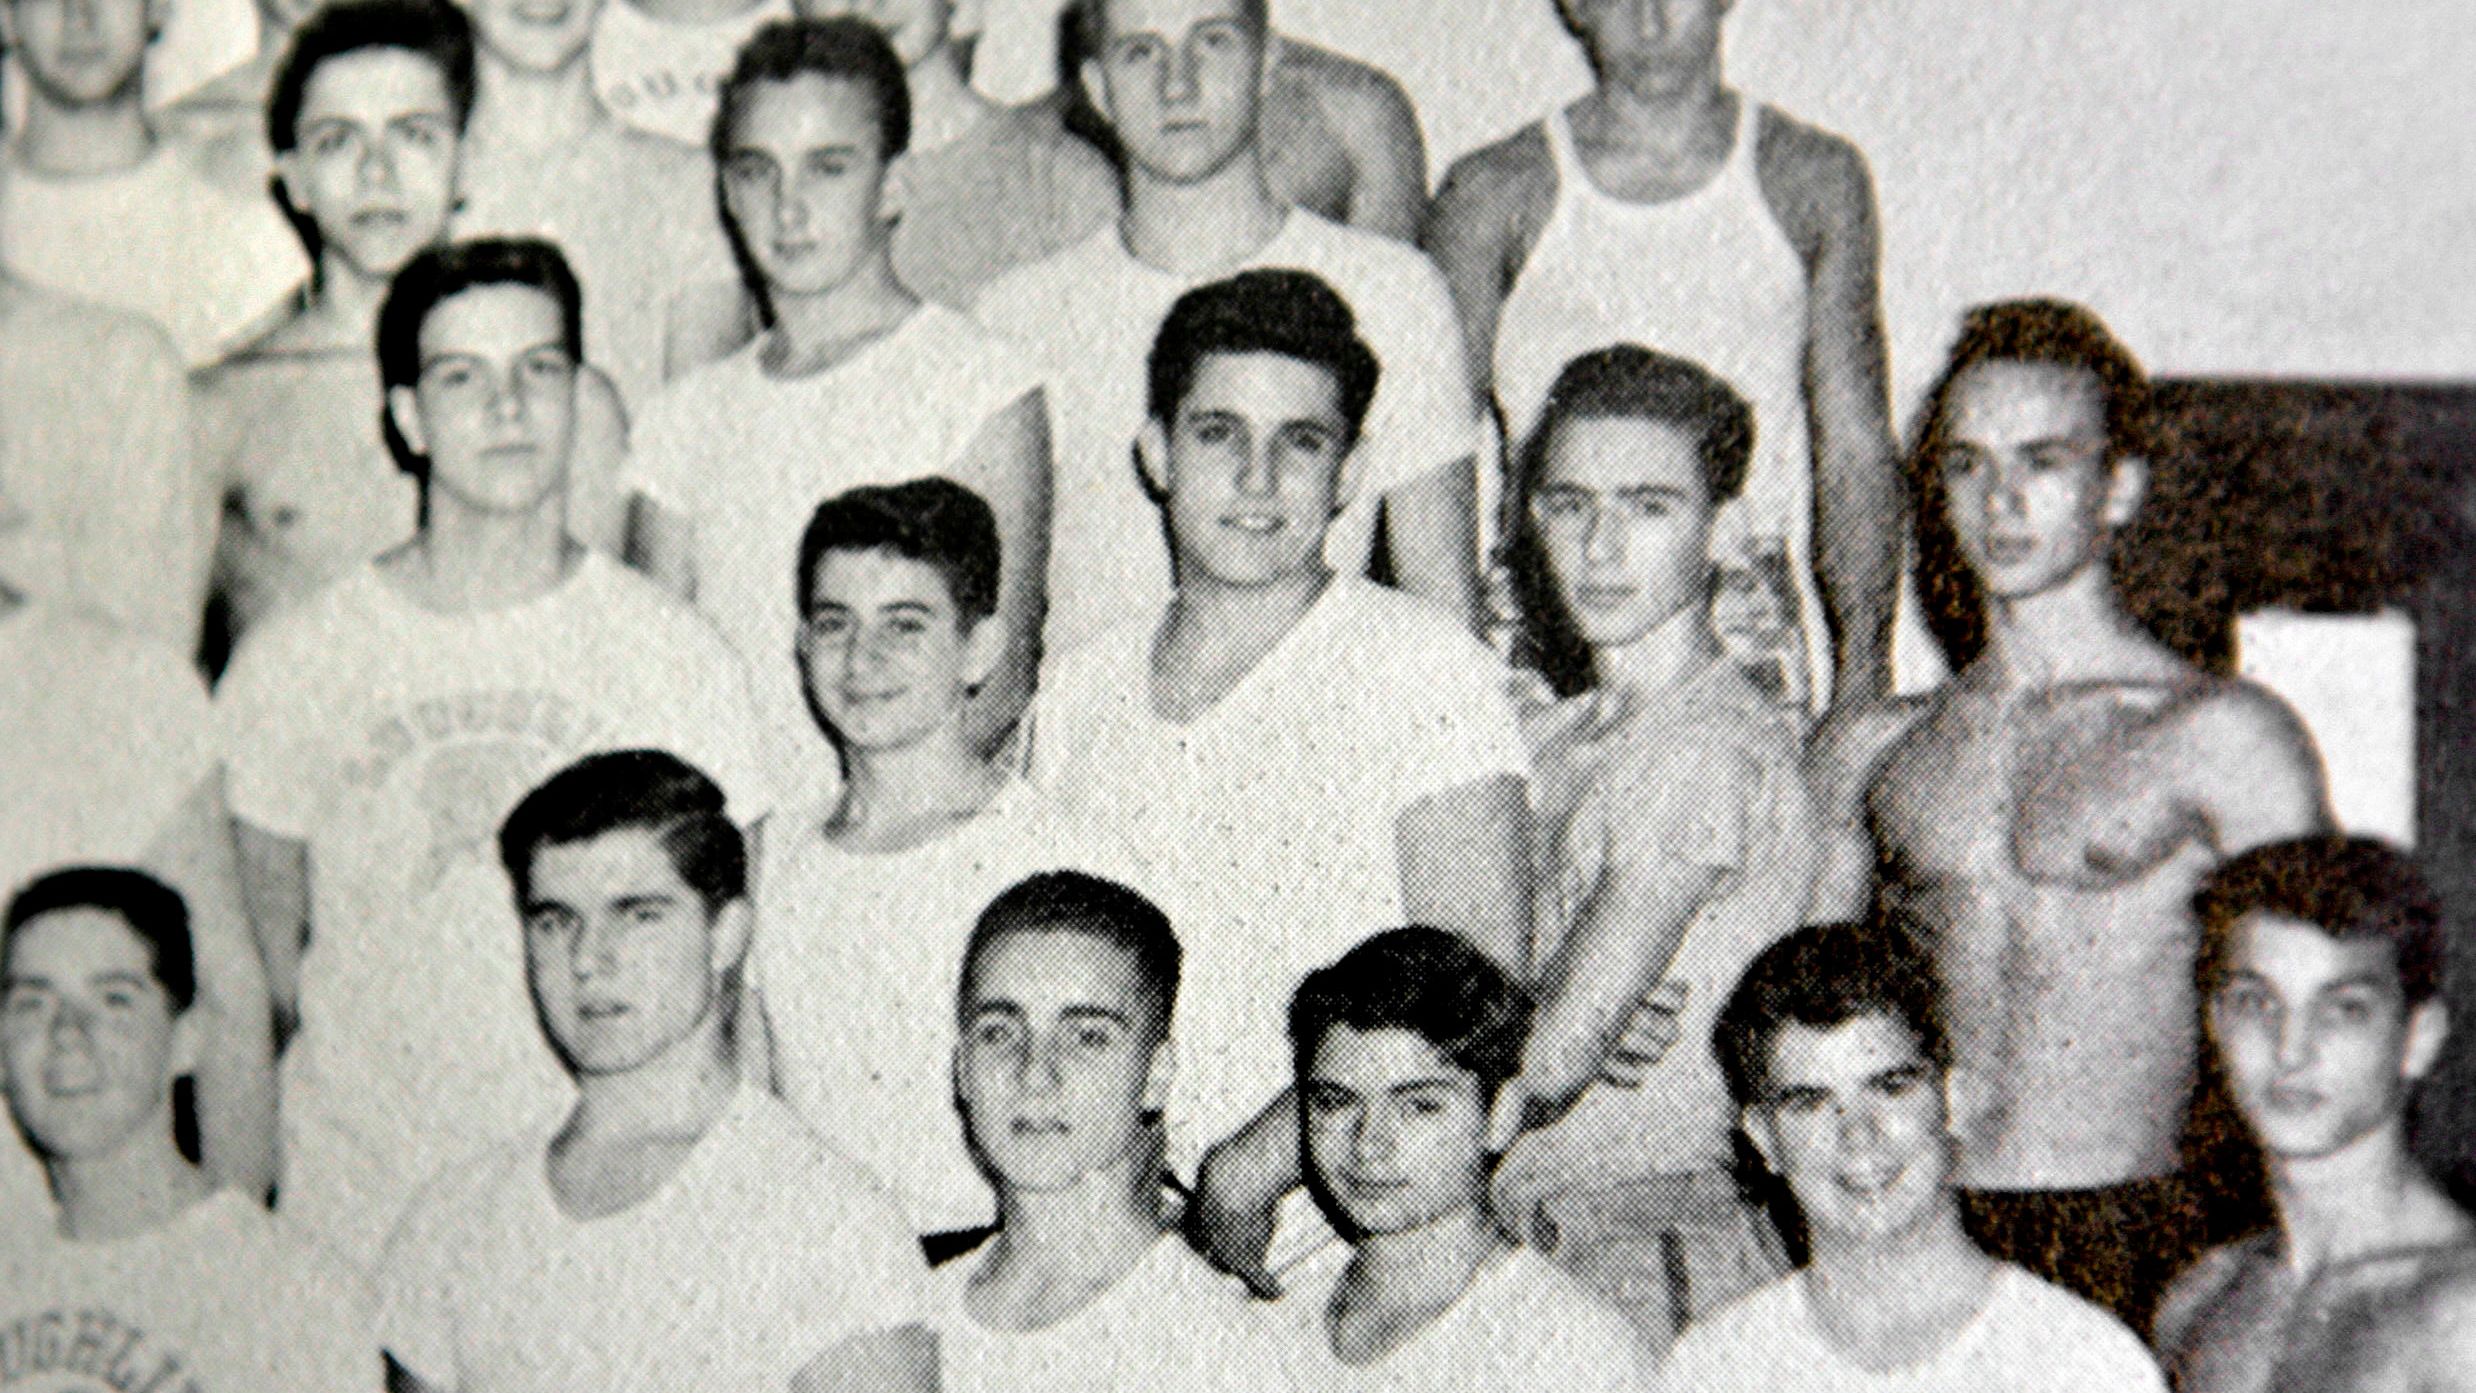 A young Giuliani is seen in the second row, third from right, in this high school yearbook photo from 1960. Giuliani is posing with other members of the weightlifting team at New York's Bishop Loughlin Memorial High School.